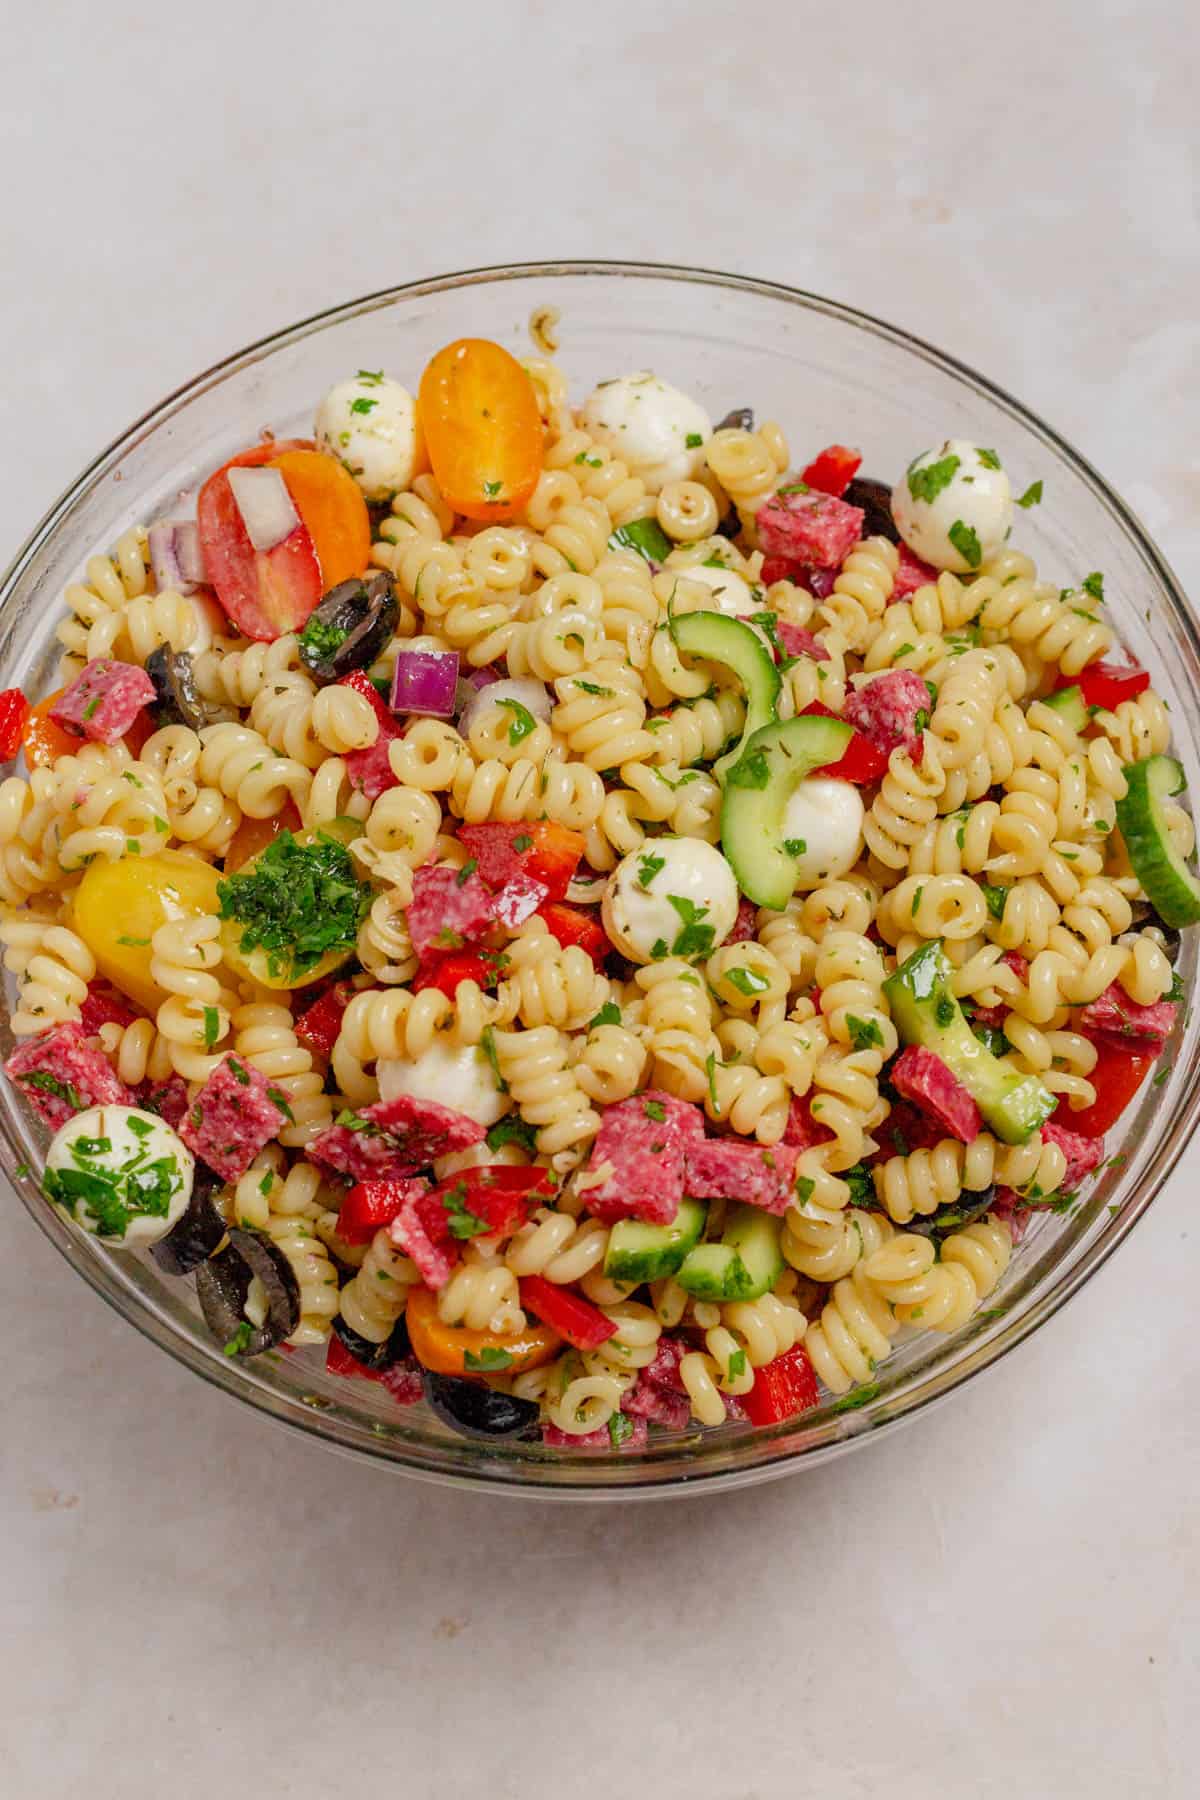 All of the pasta salad ingredients mixed together.